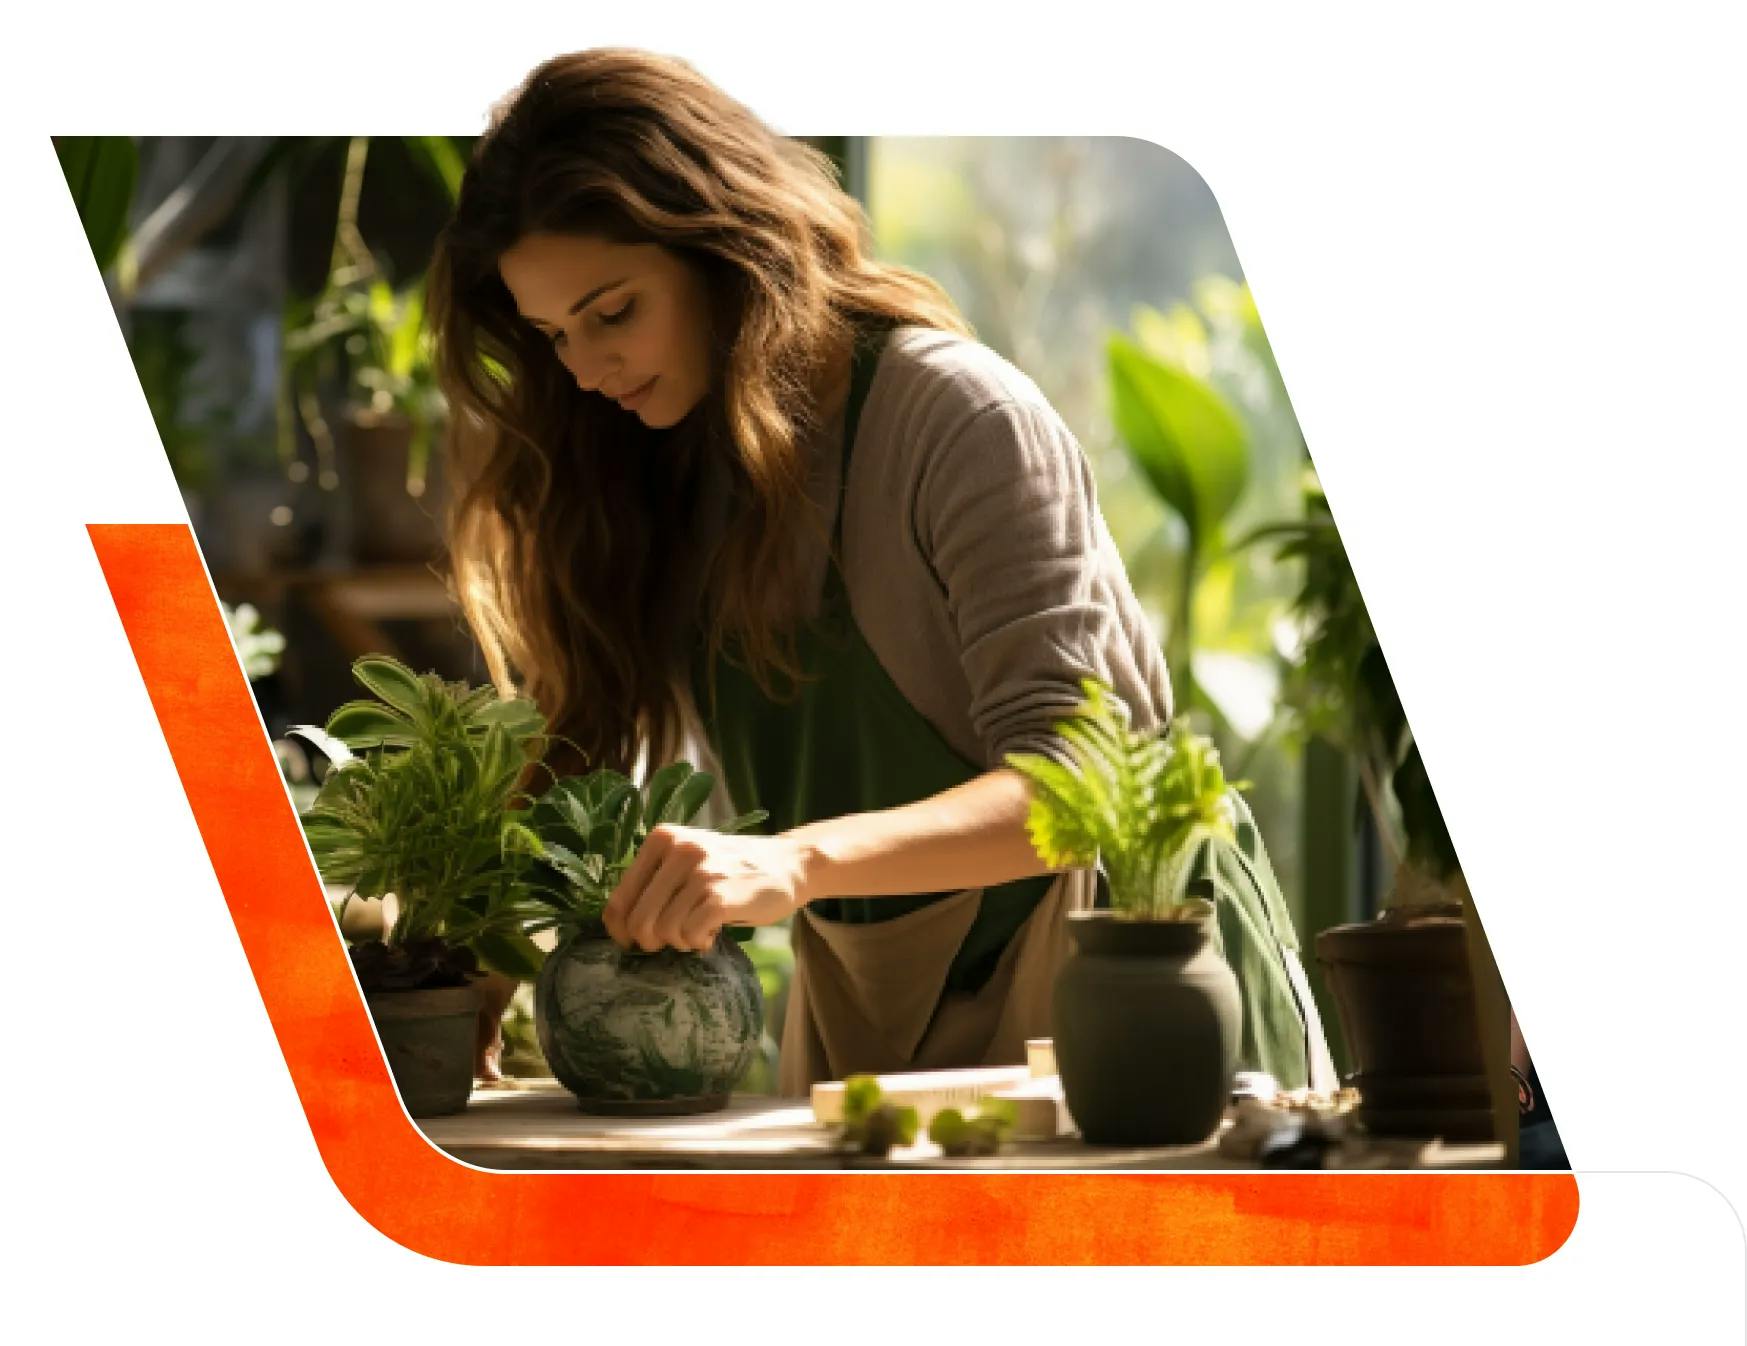  A woman carefully tending to a potted plant, nurturing its growth and ensuring its well-being.